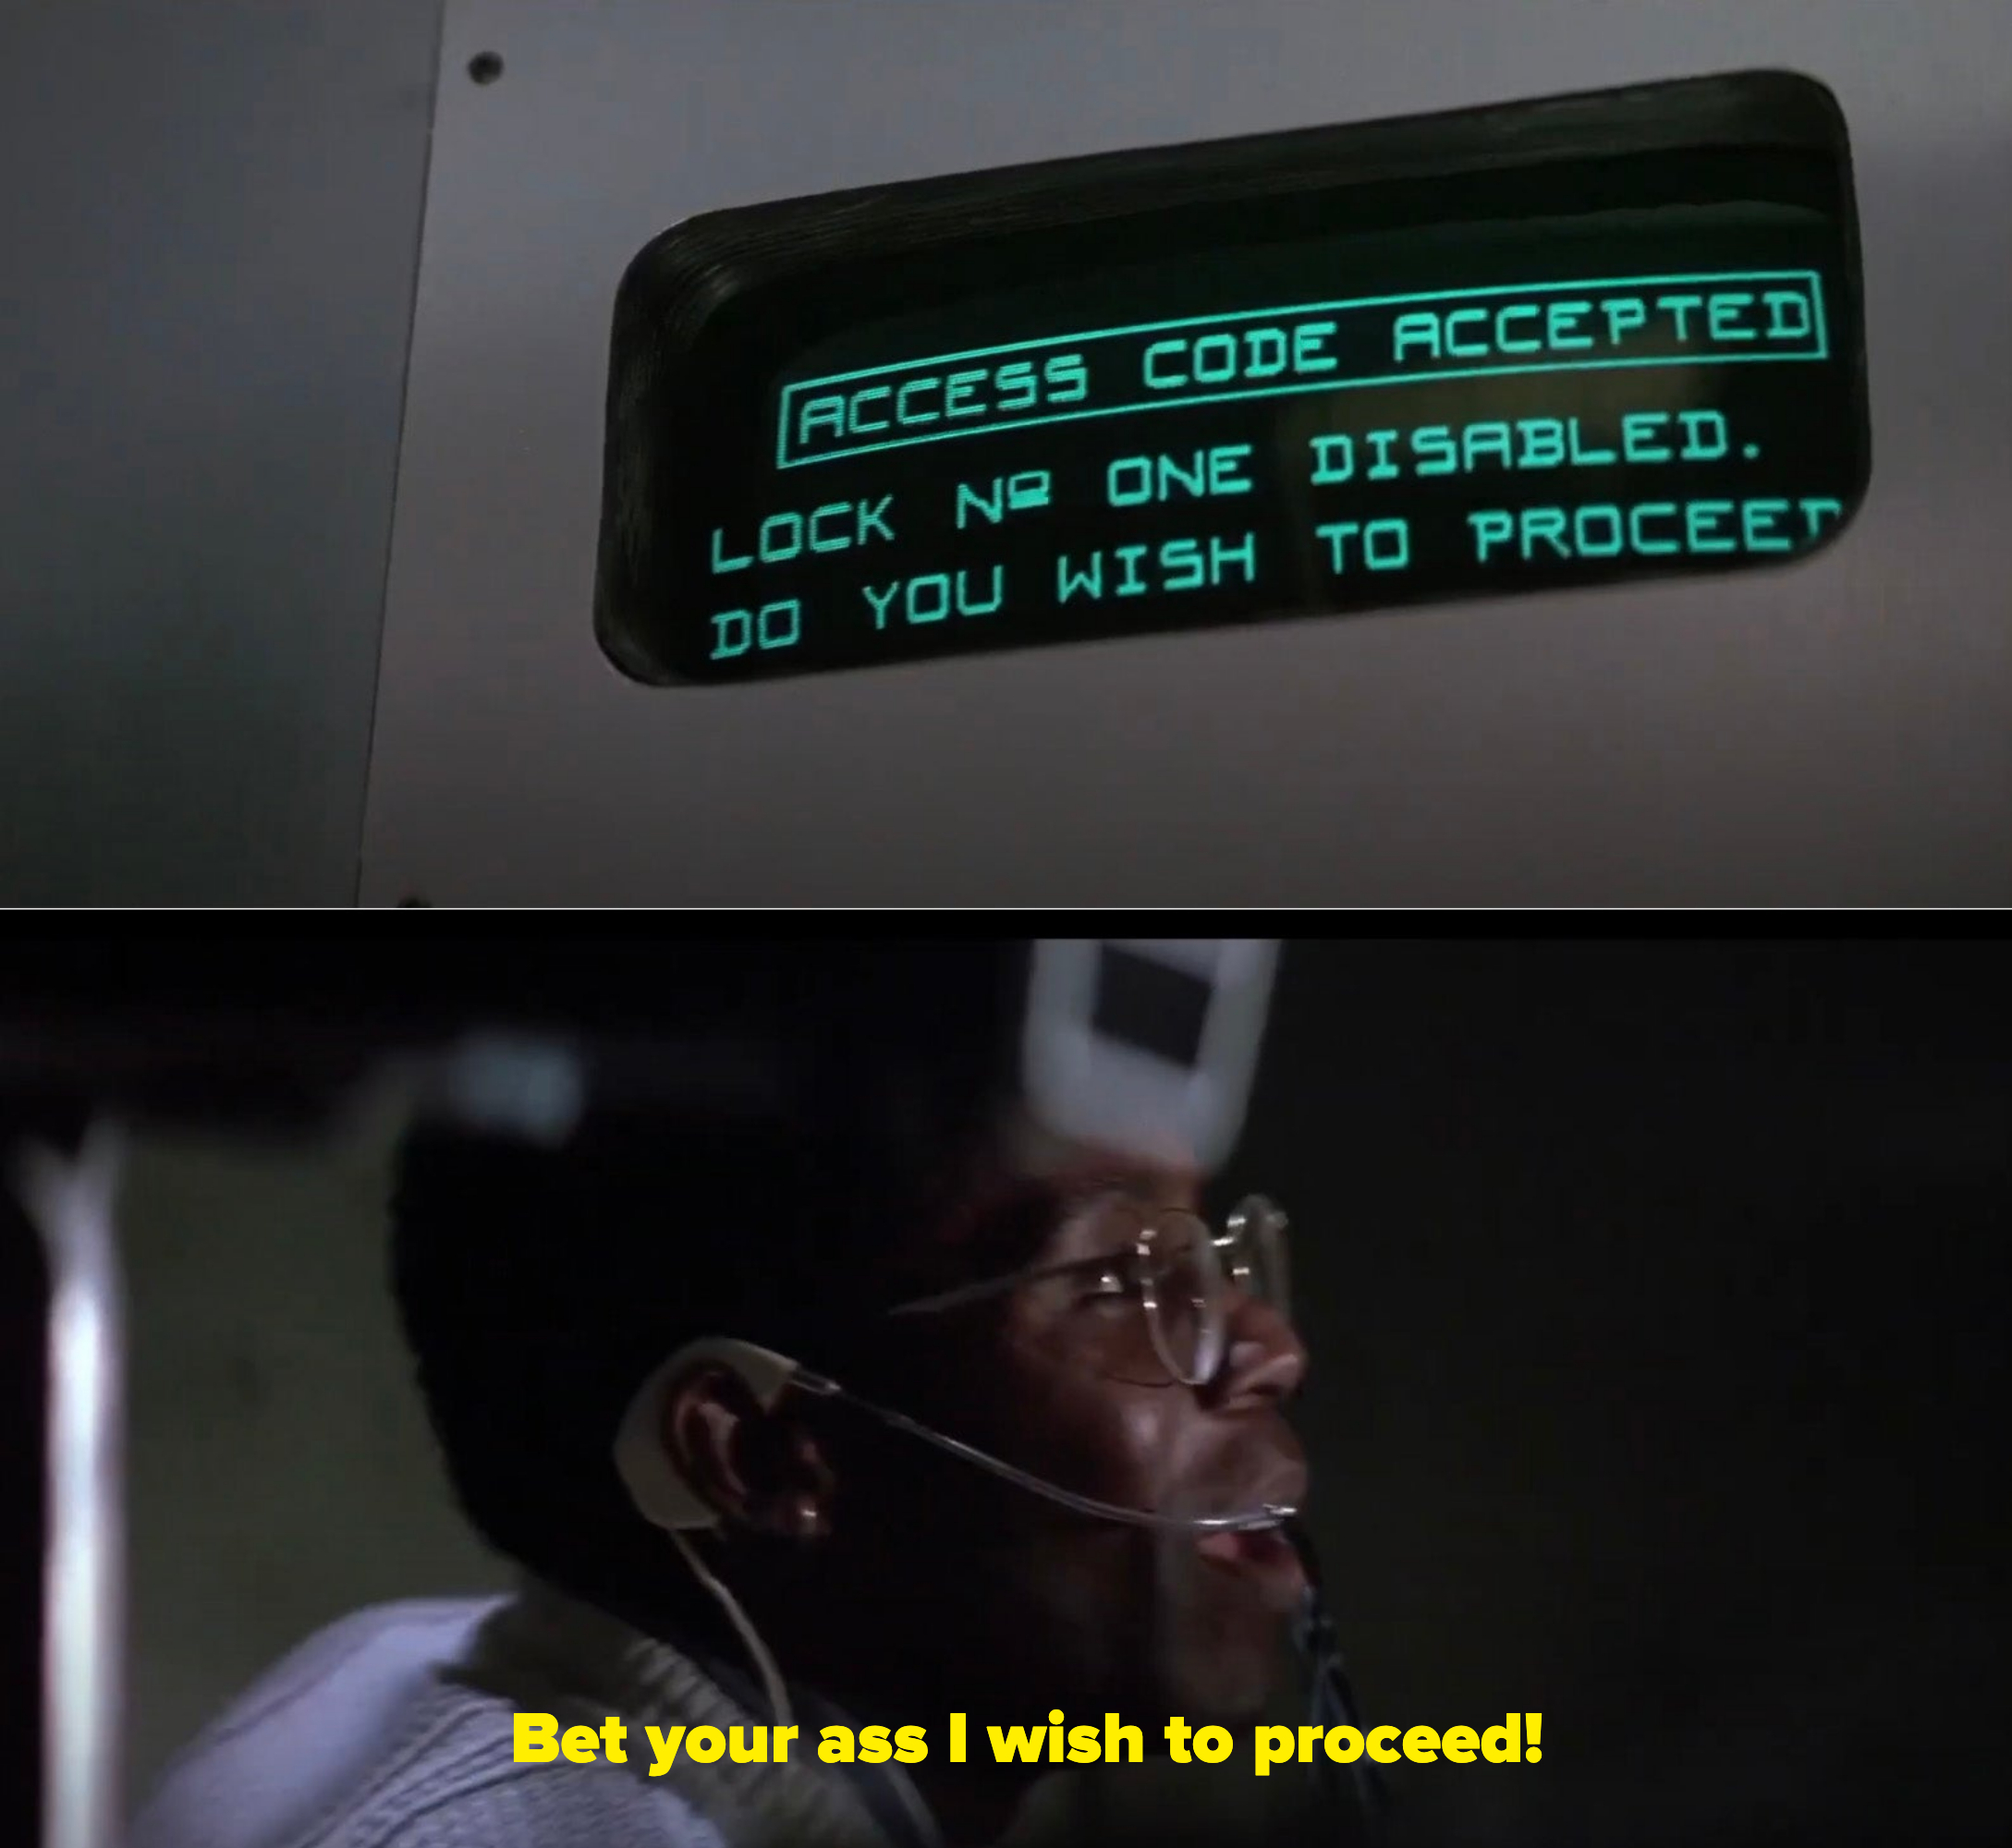 &quot;Bet your ass I wish to proceed!&quot;